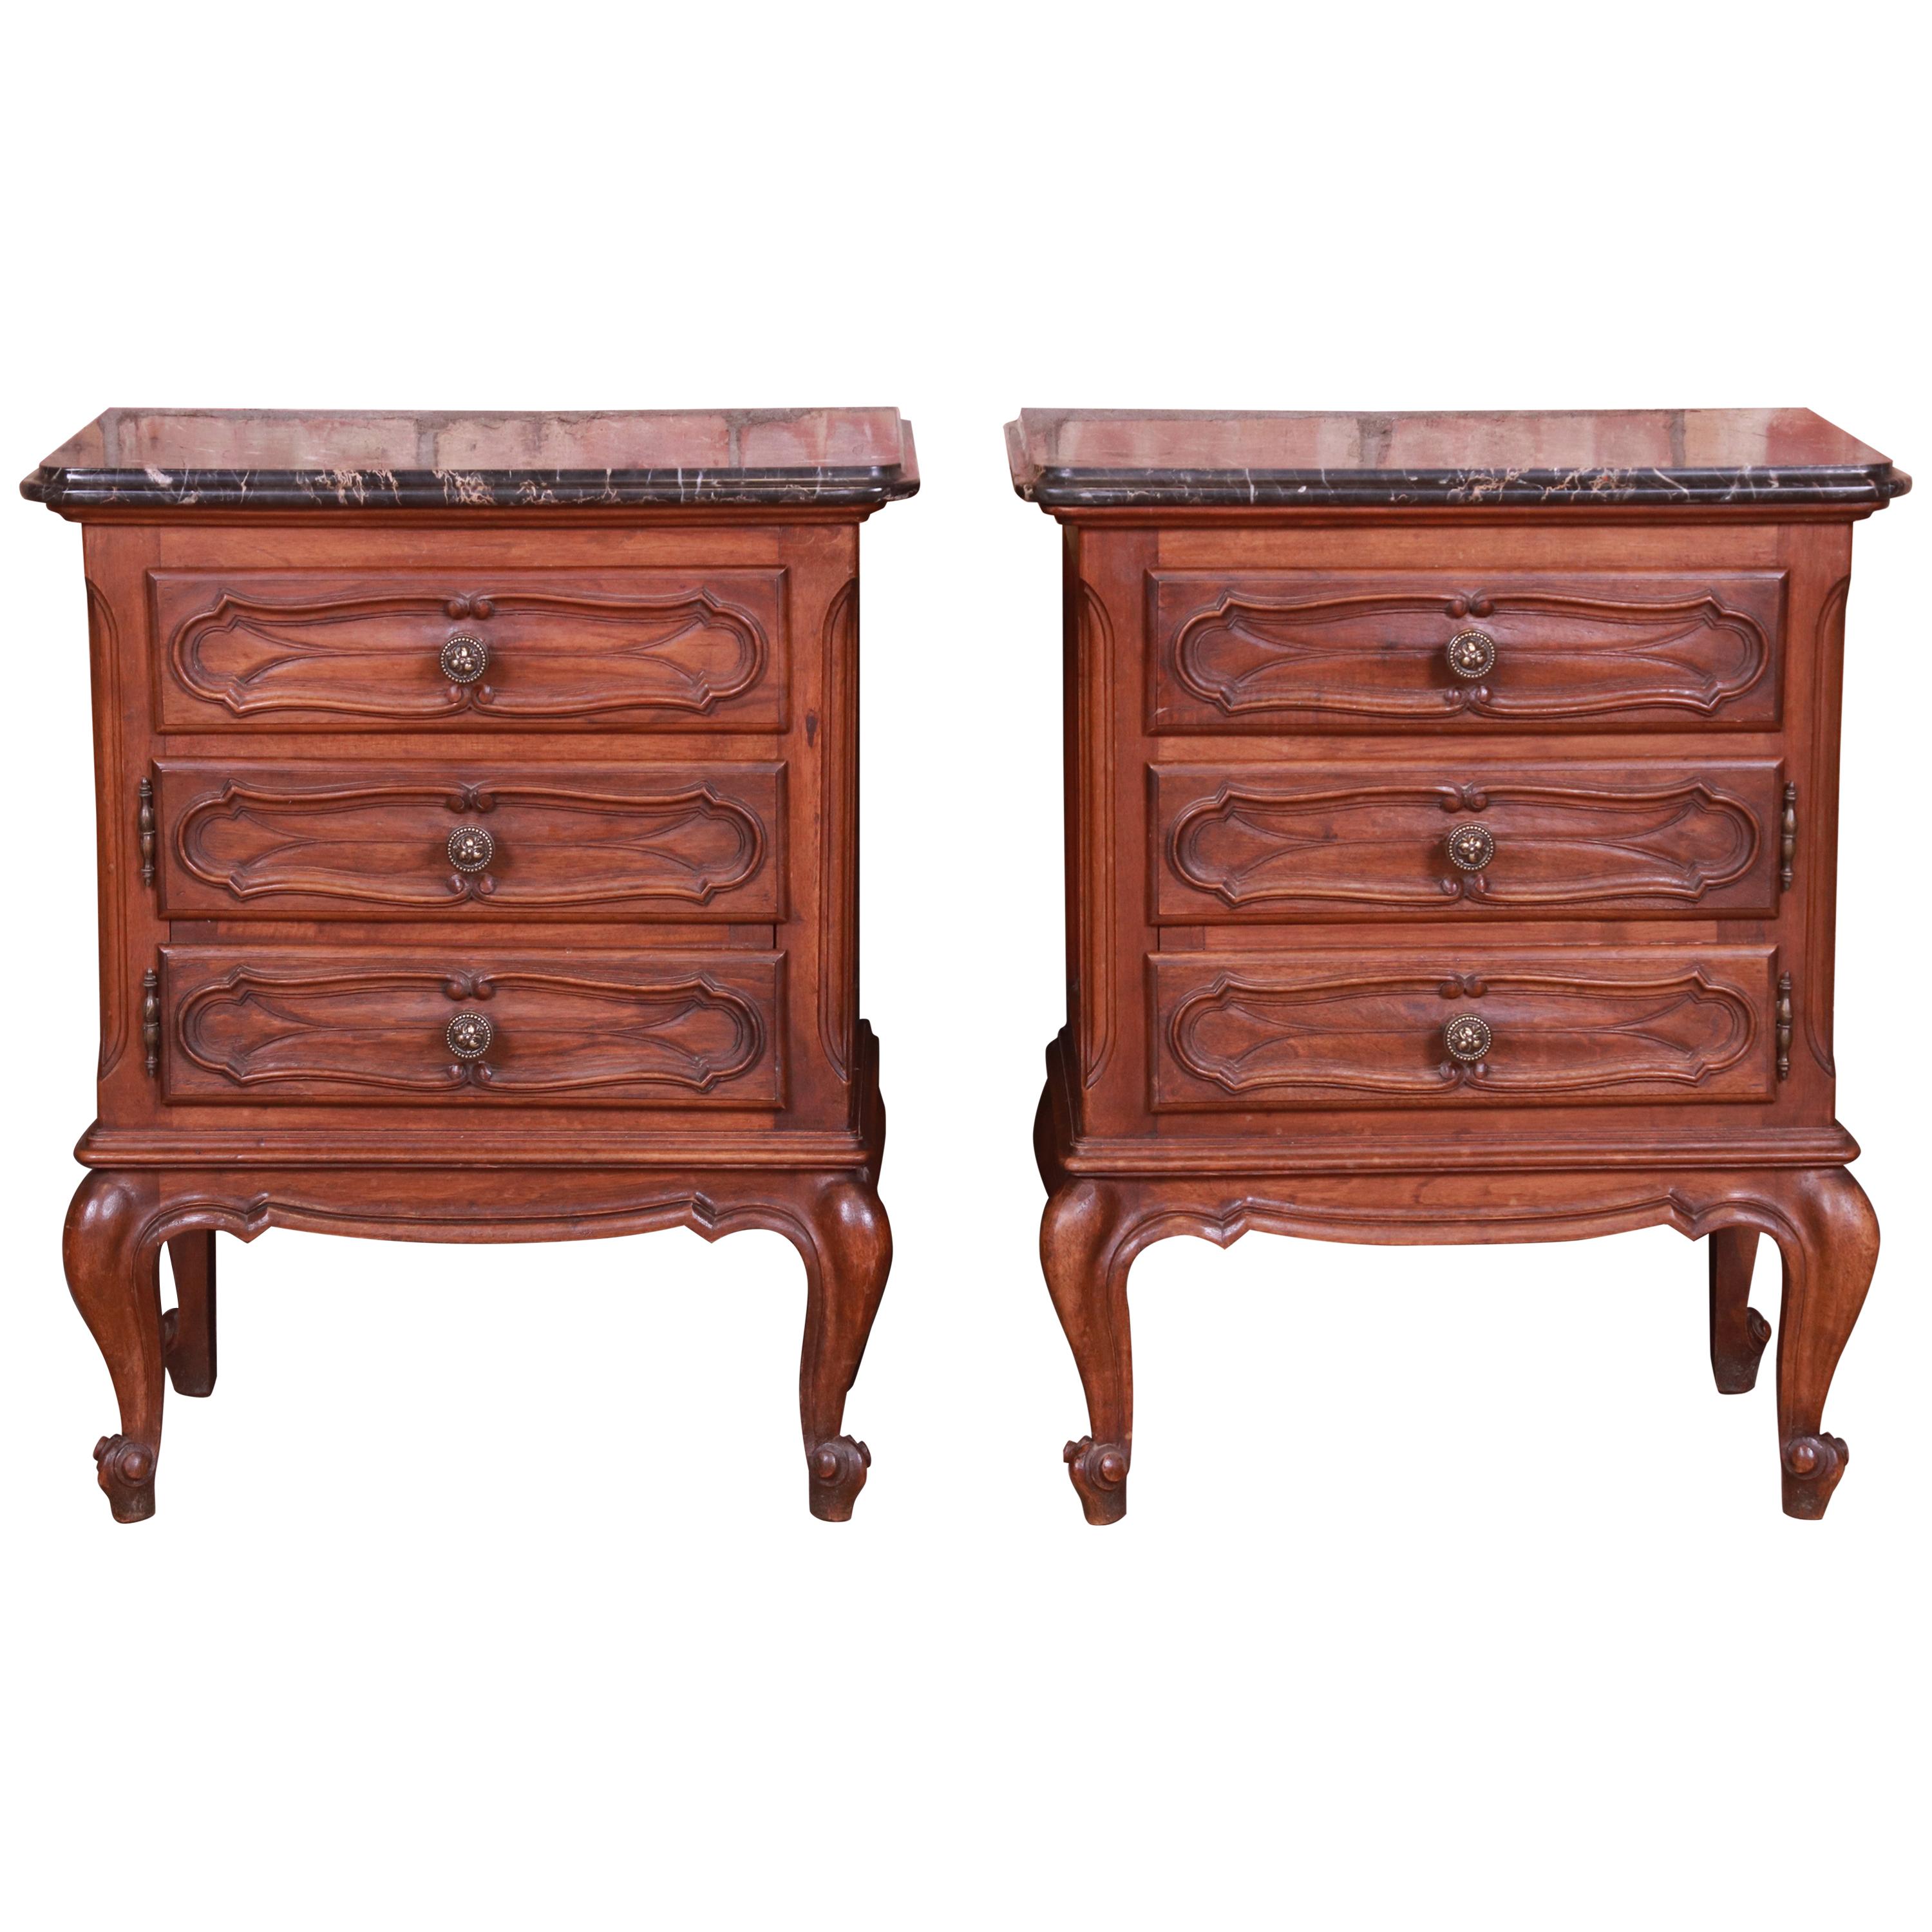 Mobili Barovero Italian Provincial Carved Walnut Marble Top Nightstands, Pair